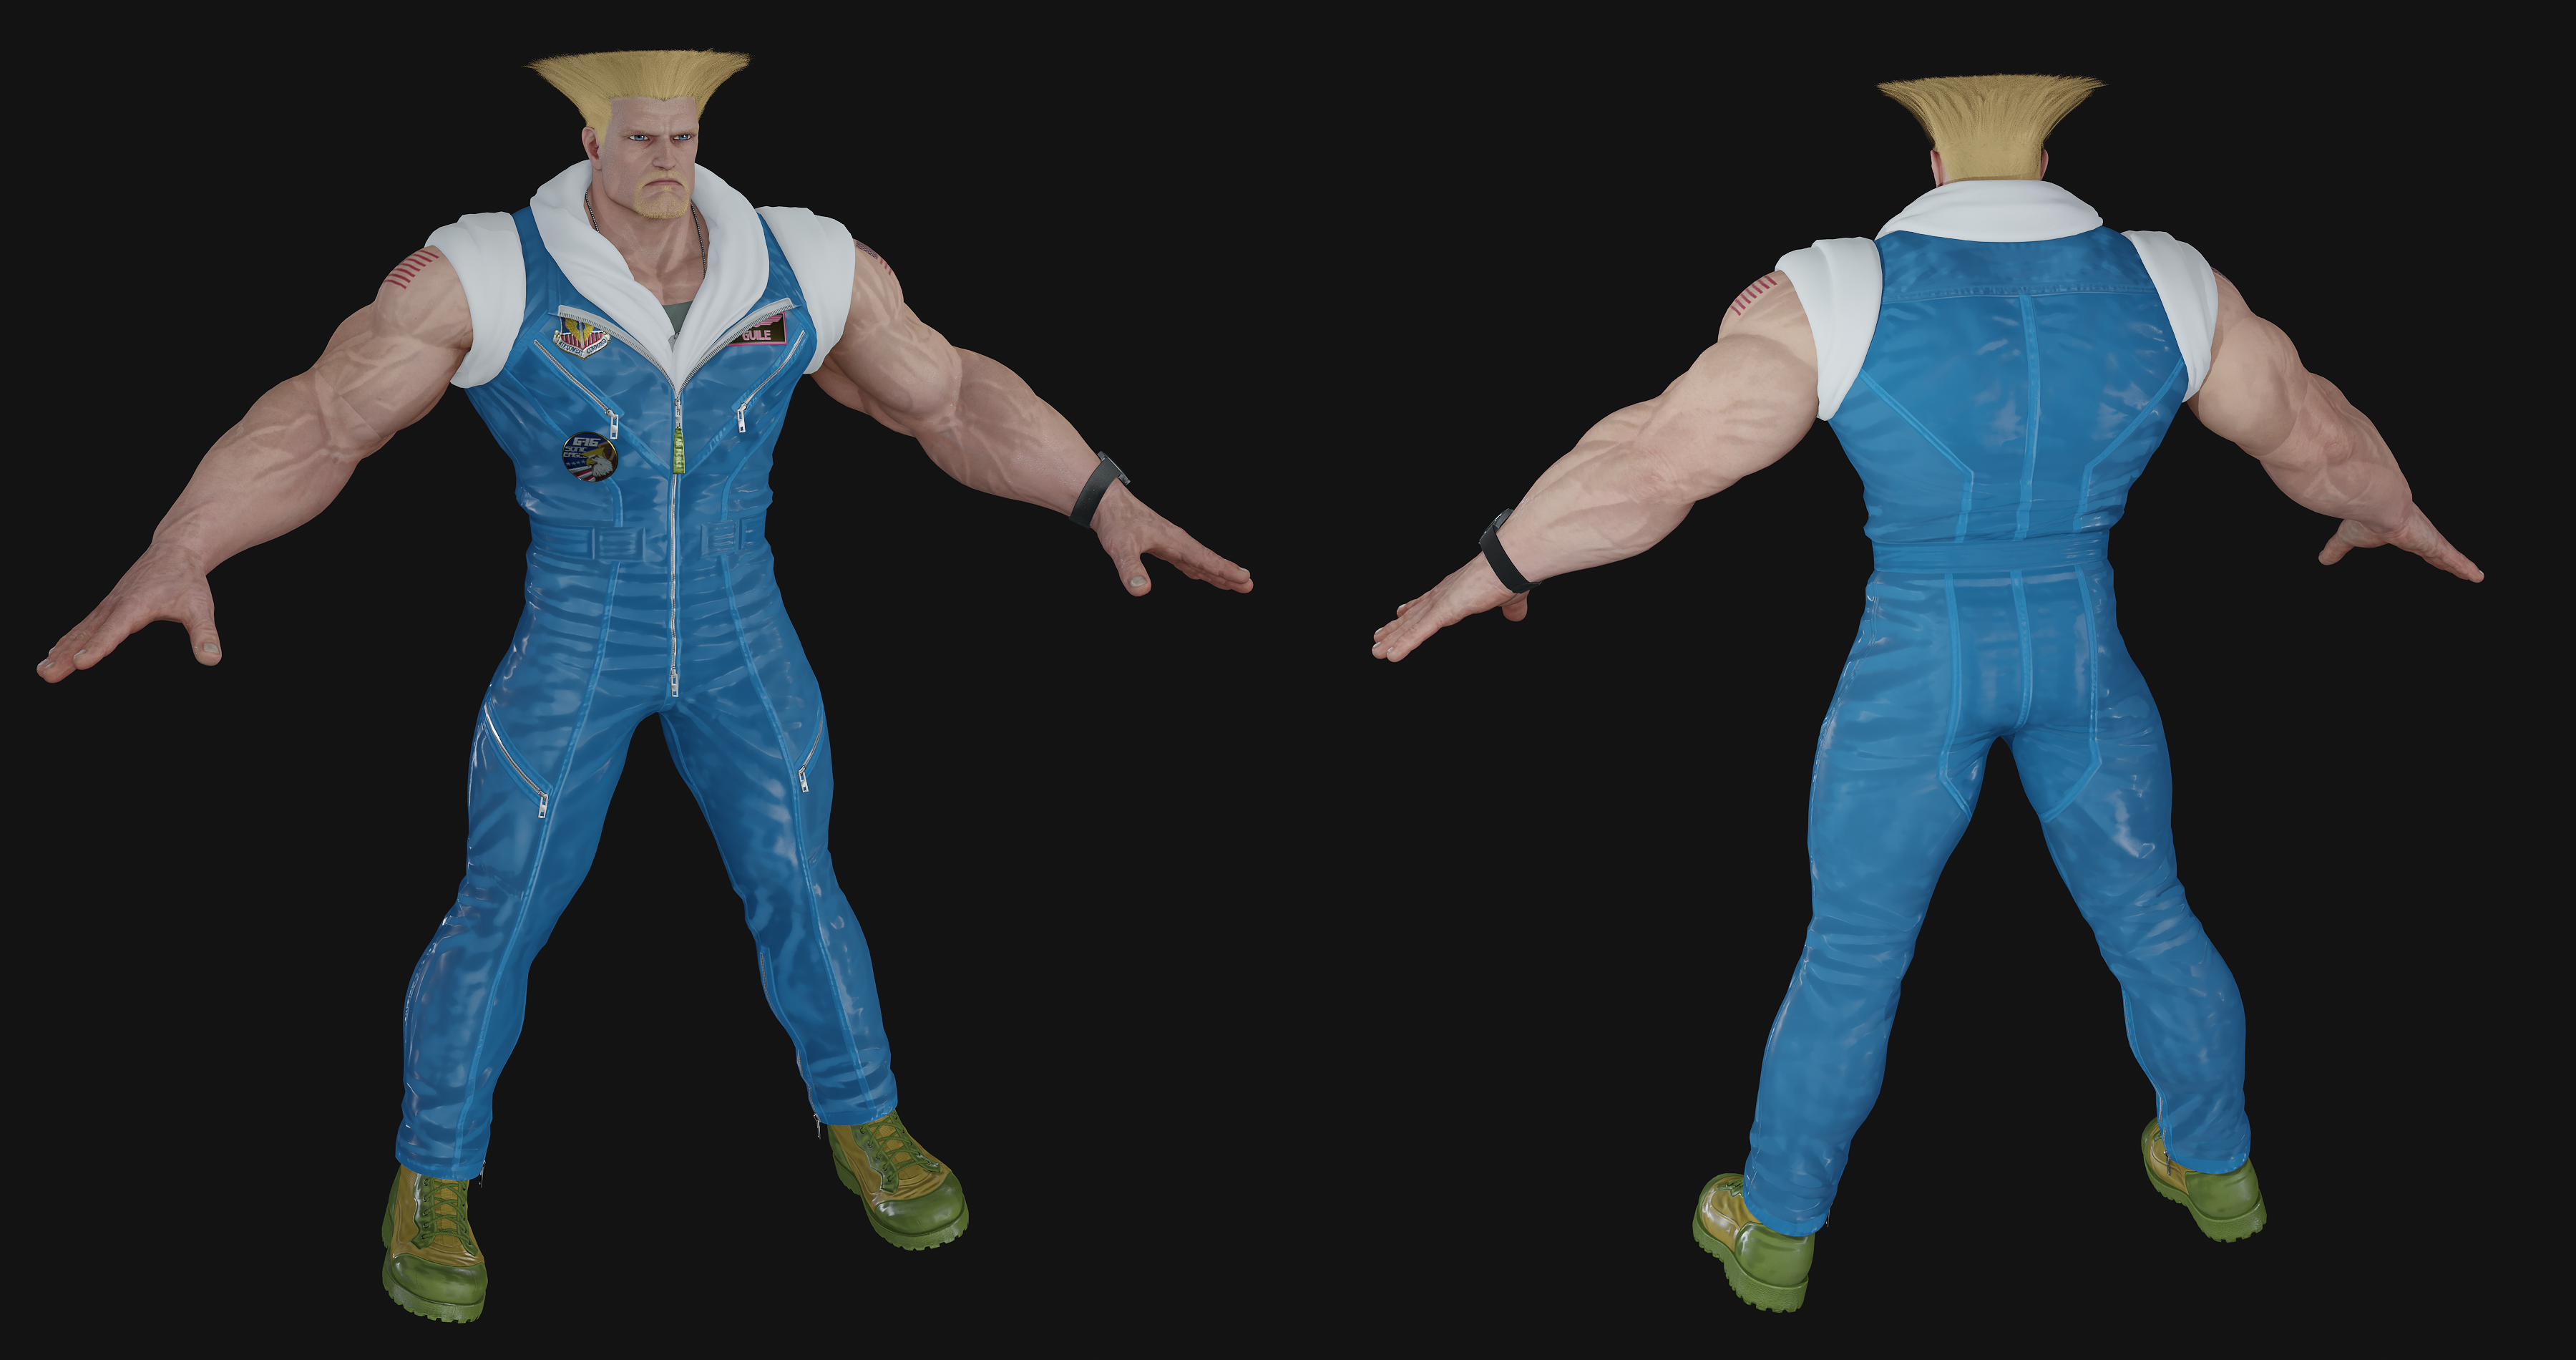 Street Fighter VI - Guile (S1) by WhiteMageSunny on DeviantArt